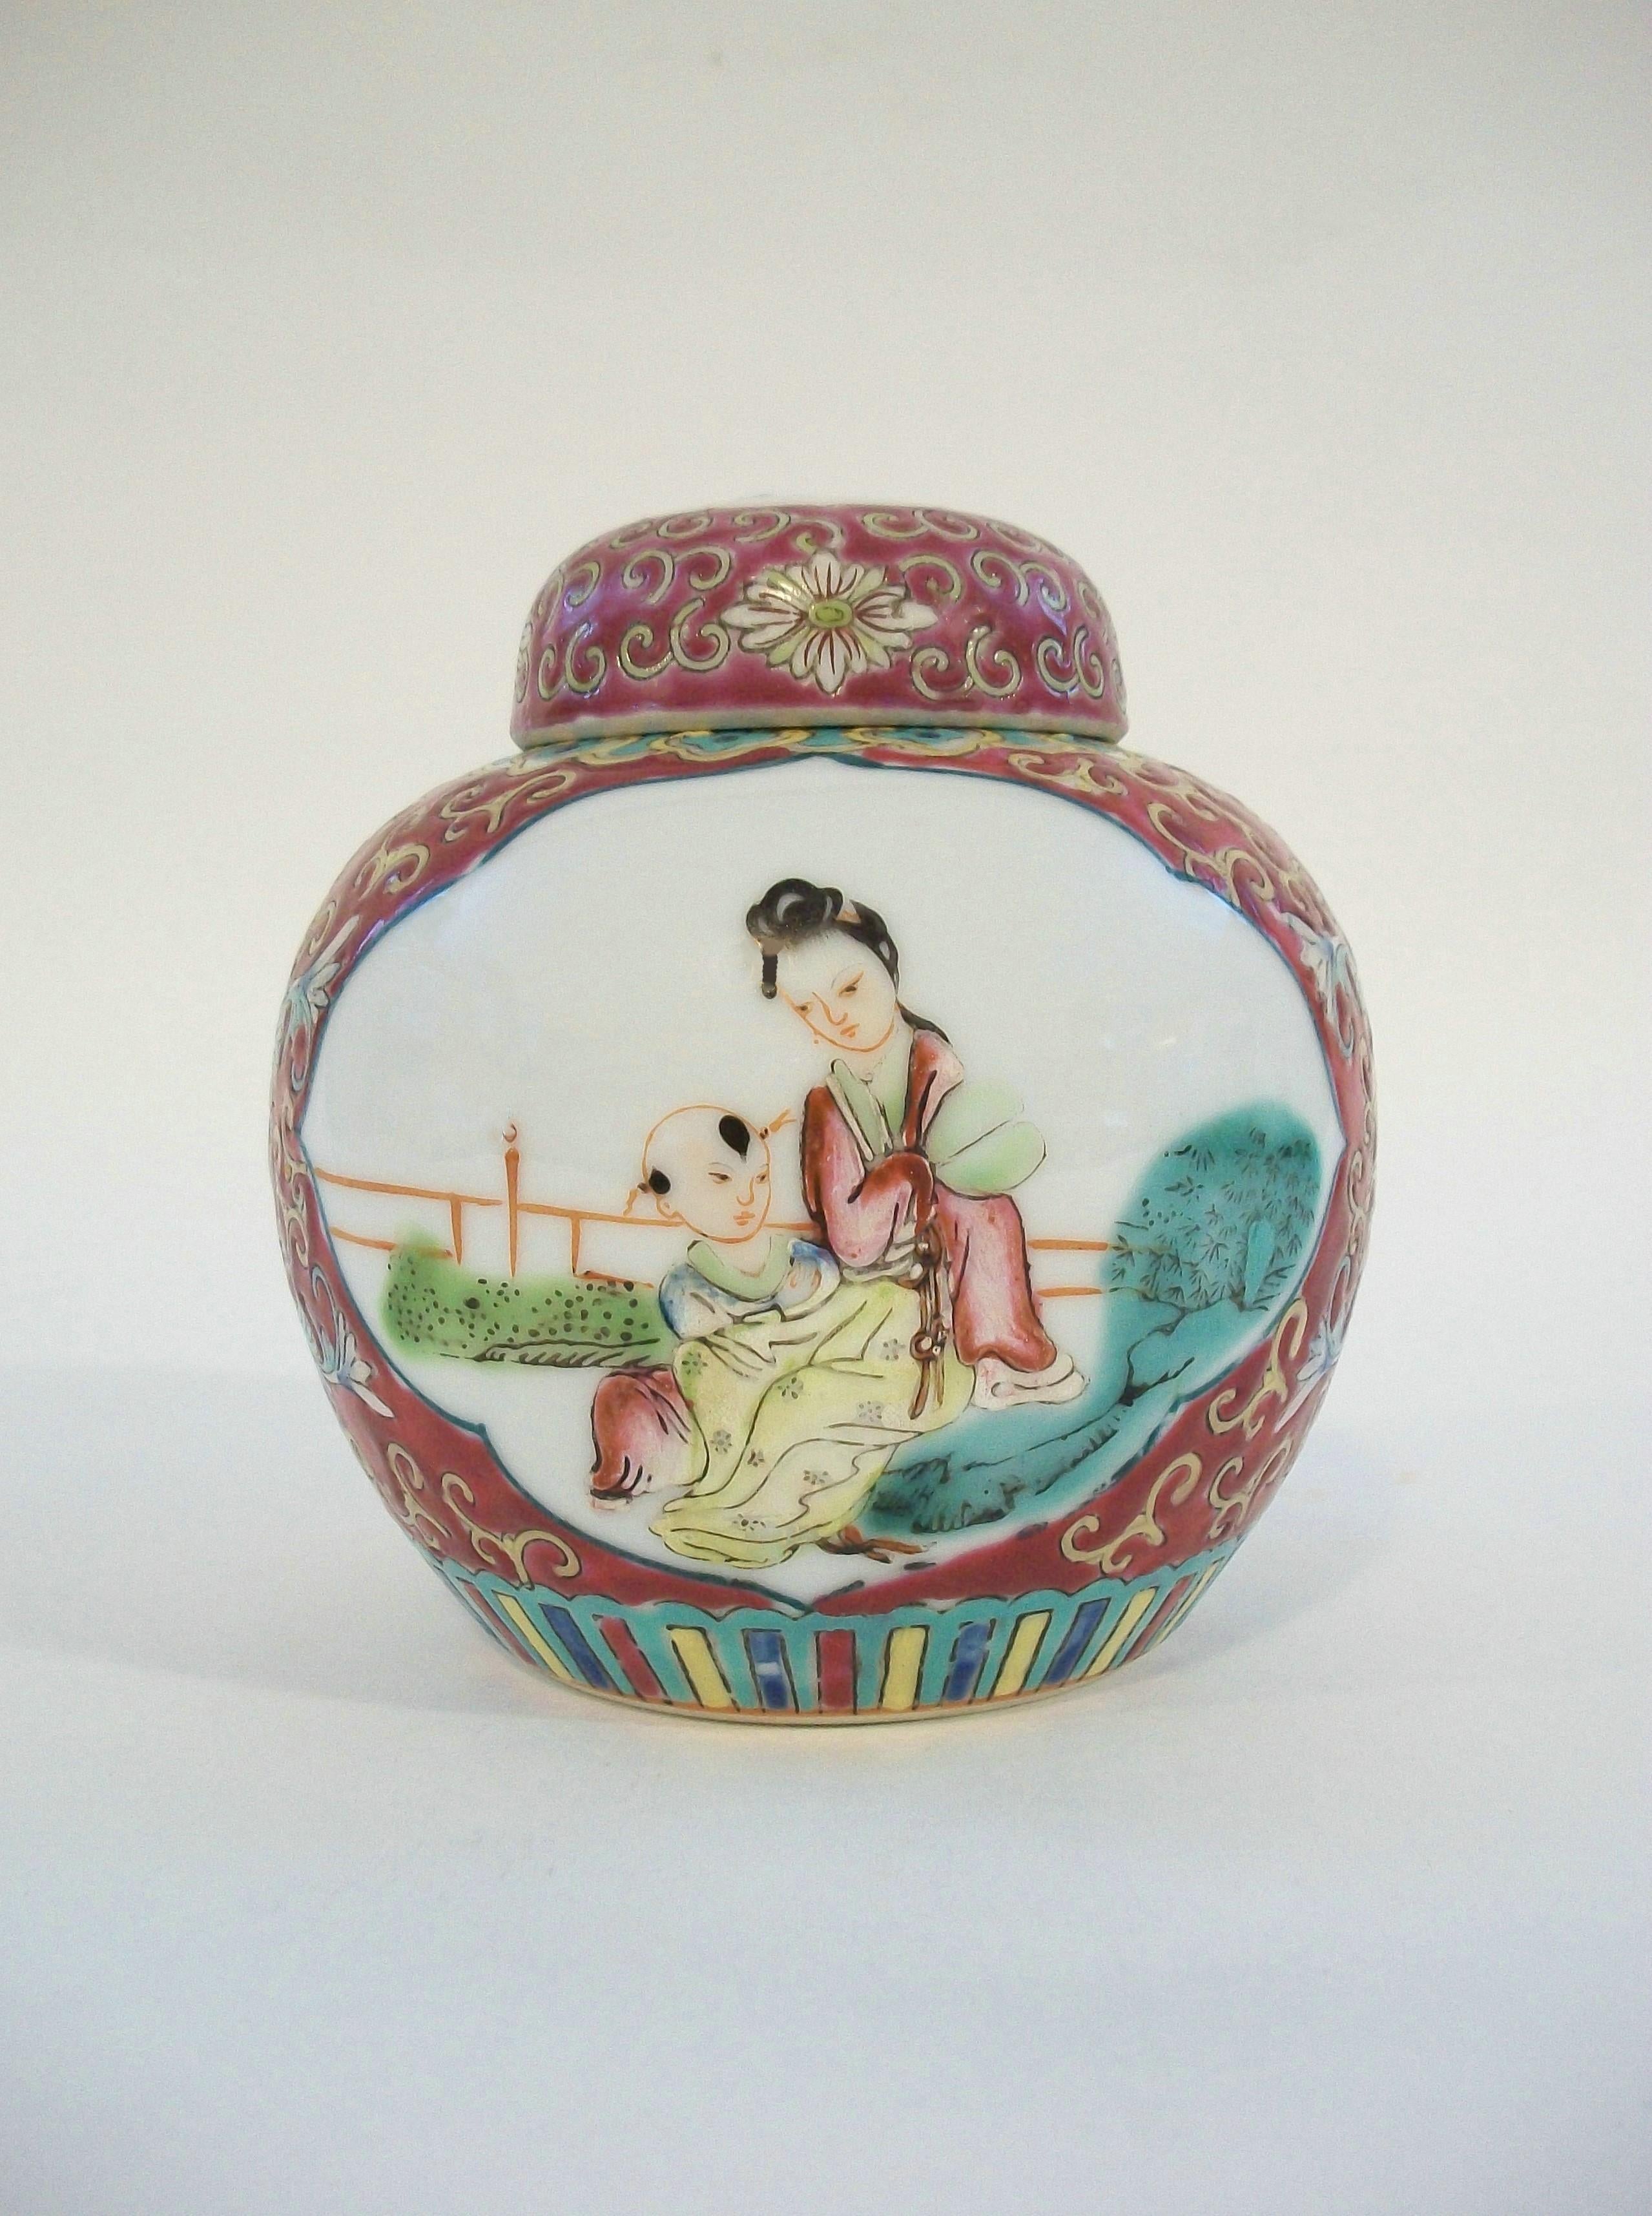 Vintage porcelain ginger jar with lid - famille rose decoration with hand painted scenic panels to the front and back - turquoise bands to the top and bottom of the jar - unsigned - China - mid 20th century.

Excellent vintage condition - minor